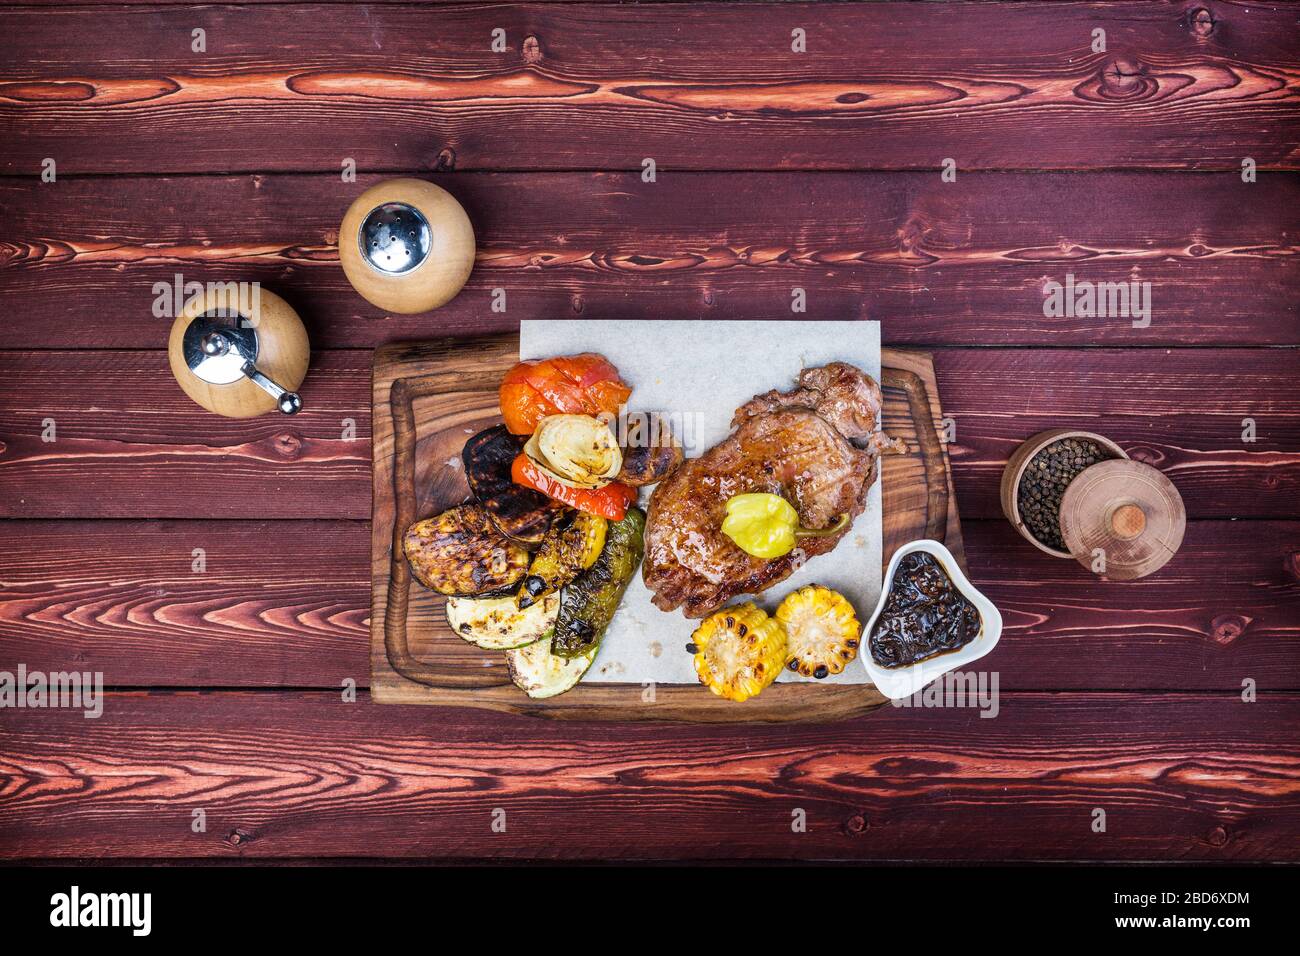 Delicious grilled steak with assorted roast vegetables and corn. There is a pepper grinder and sauce. Top view Stock Photo